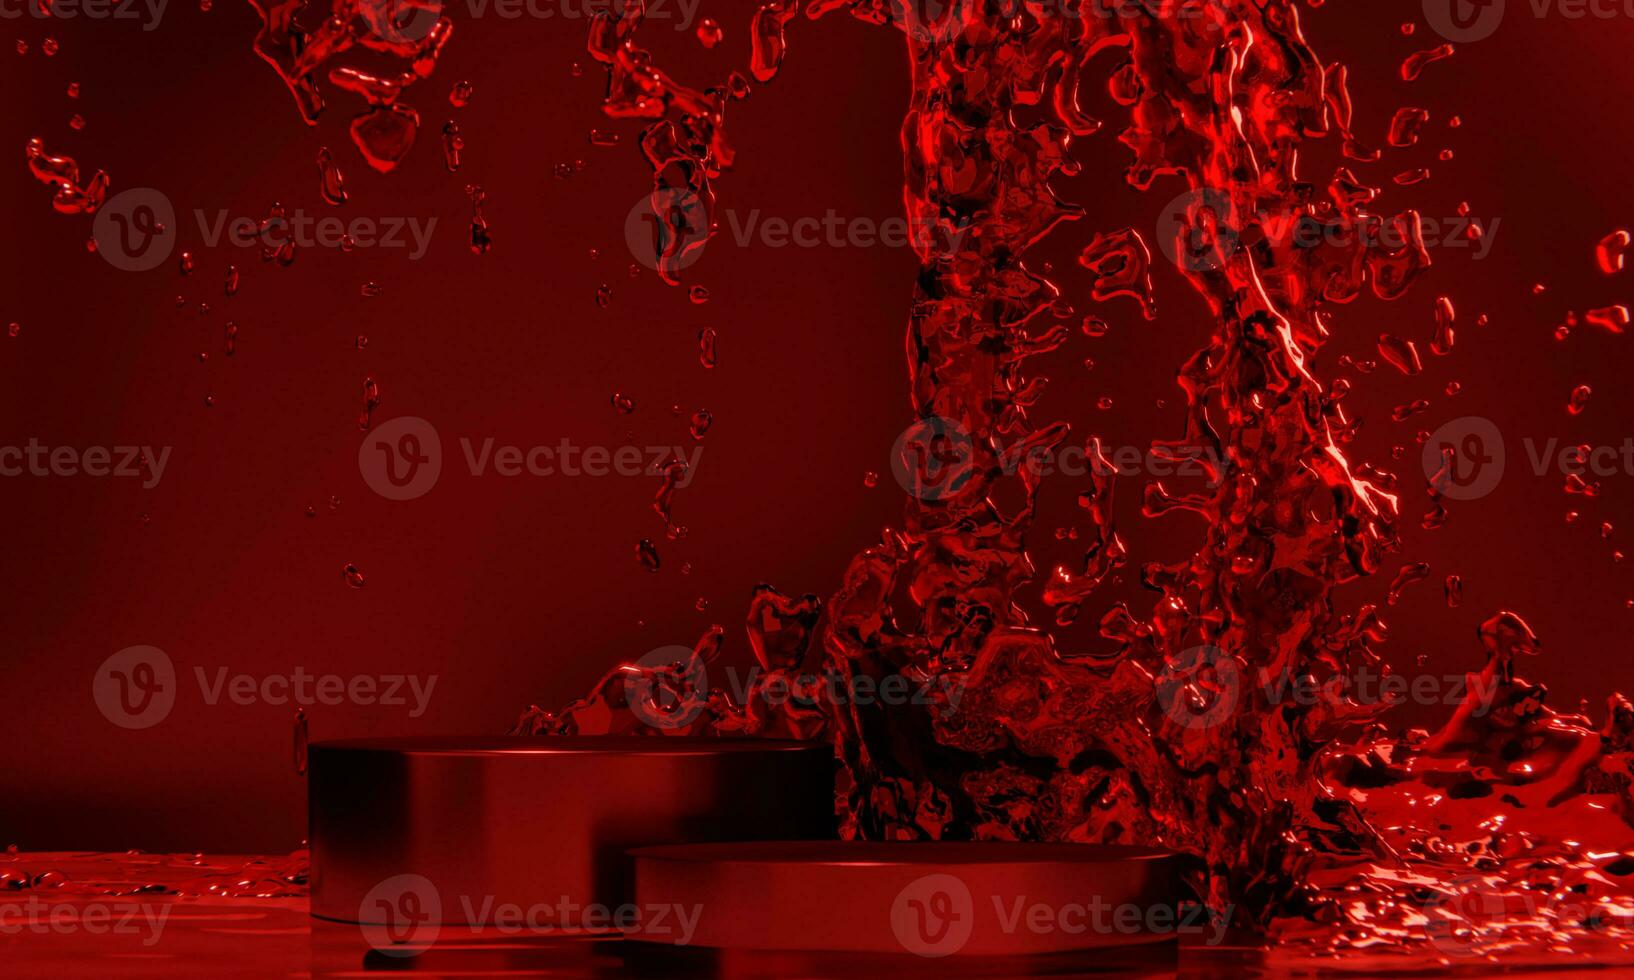 the product display stand and red water splashing on background. photo